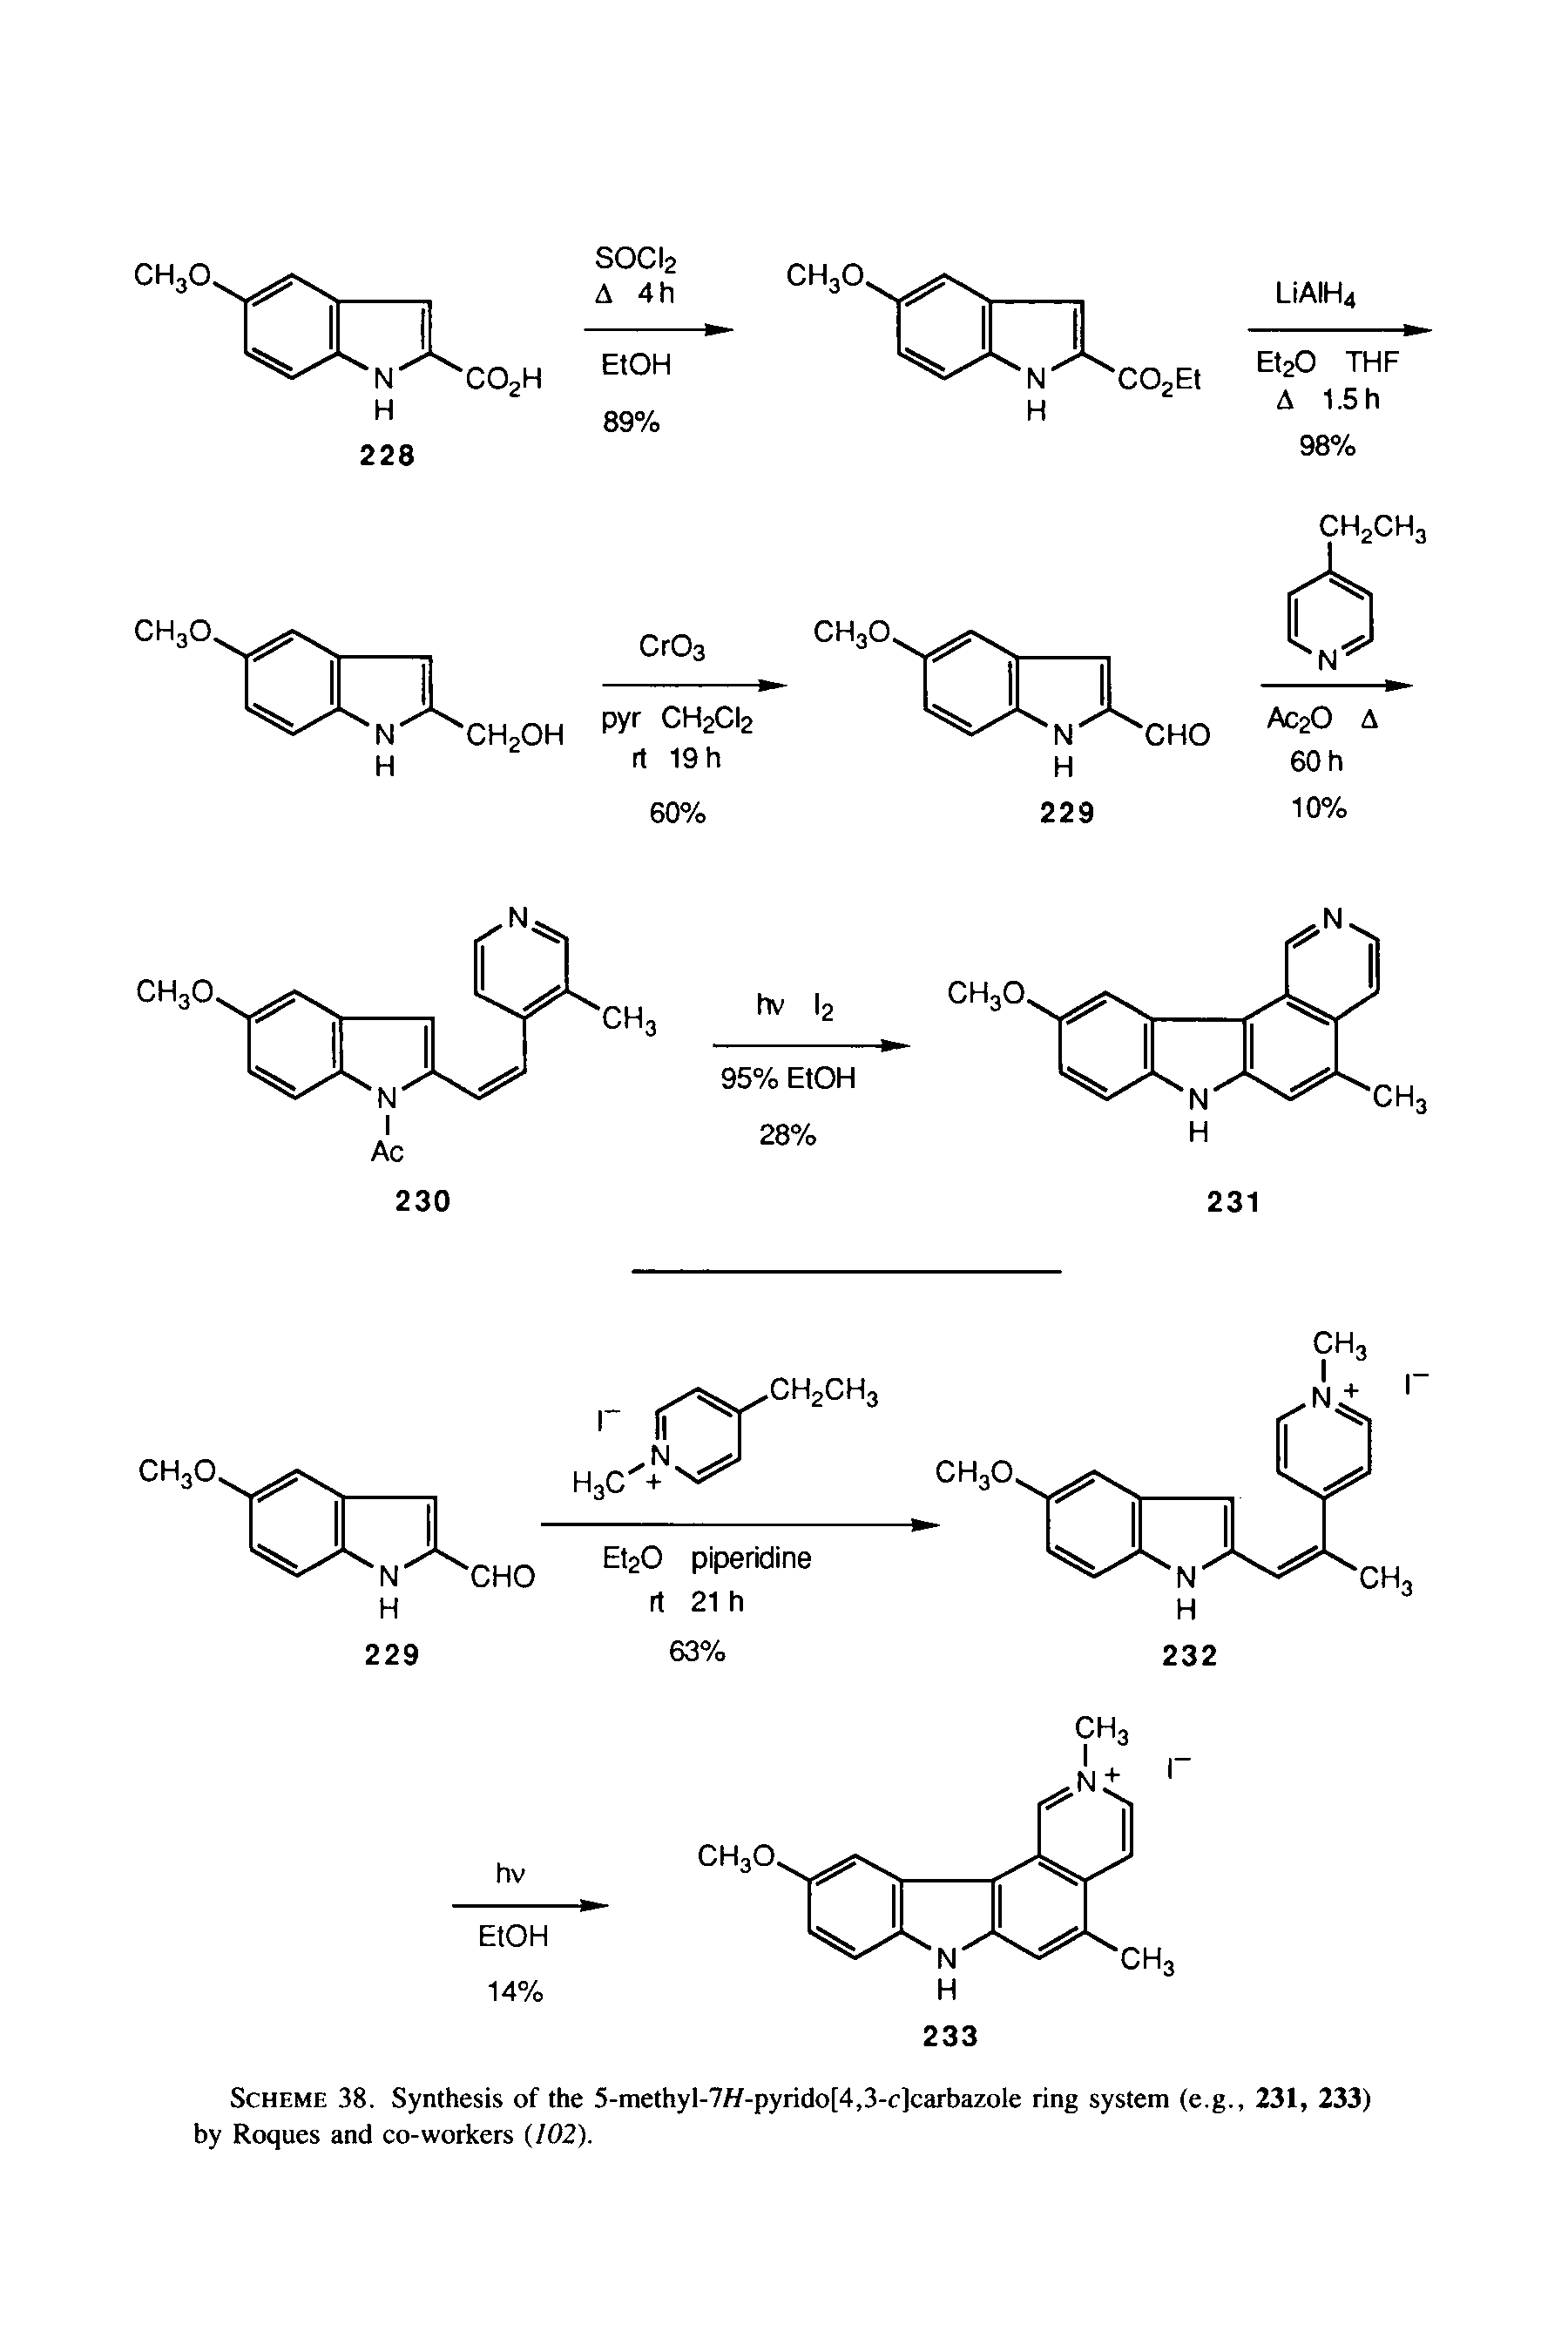 Scheme 38. Synthesis of the 5-methyl-7//-pyrido[4,3-c]carbazole ring system (e.g., 231, 233) by Roques and co-workers (102).